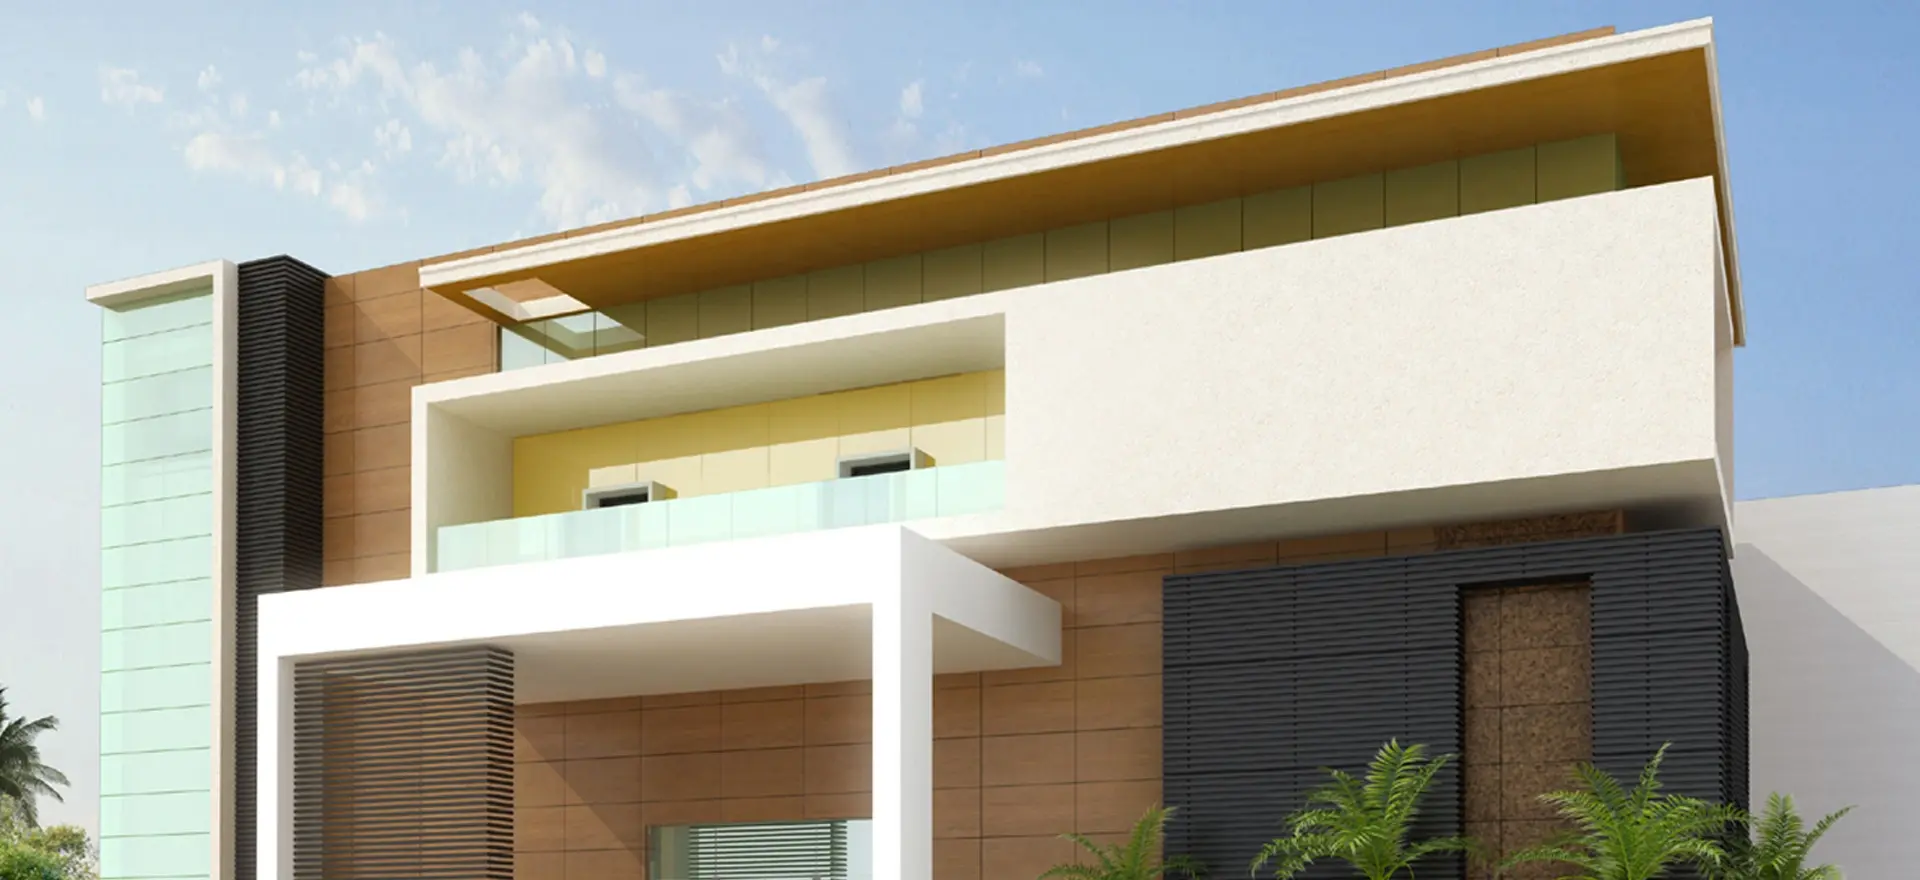 Anss Crafters Architects, a professional firm of Architects in Tirunelveli , India.